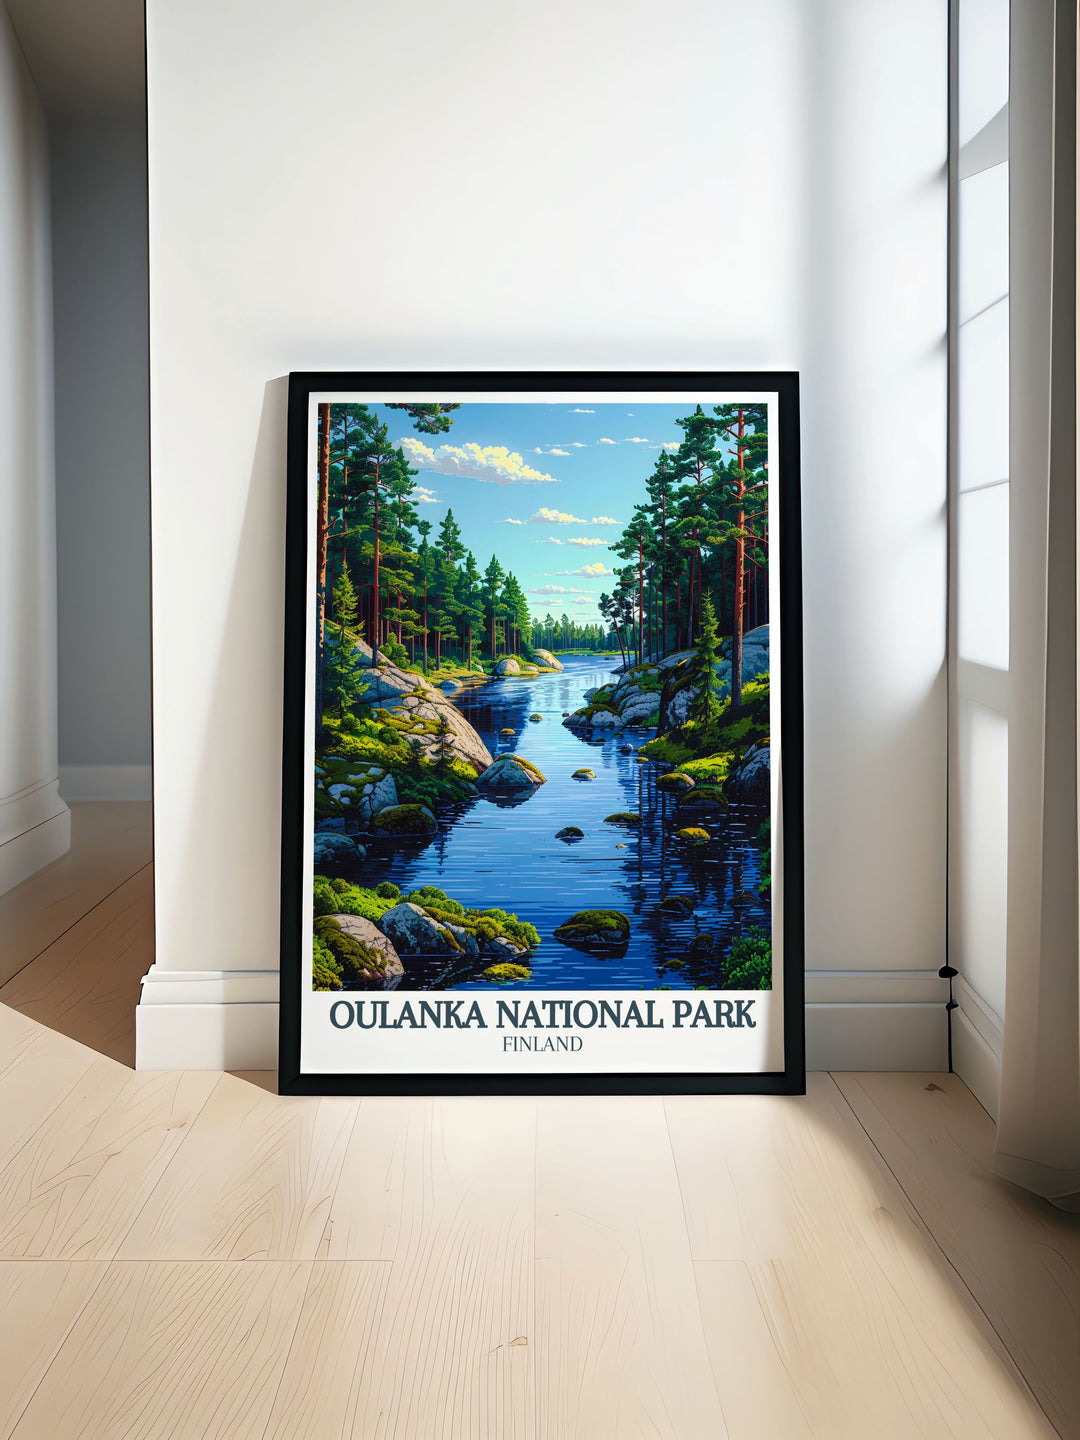 Beautiful travel poster art showcasing the Oulanka river Kiutakongas Rapids in Finland. Perfect national park print and nature wall art for home decor and gifts. Ideal for fans of Scandinavian art and hiking trails like the Karhunkierros Hike.